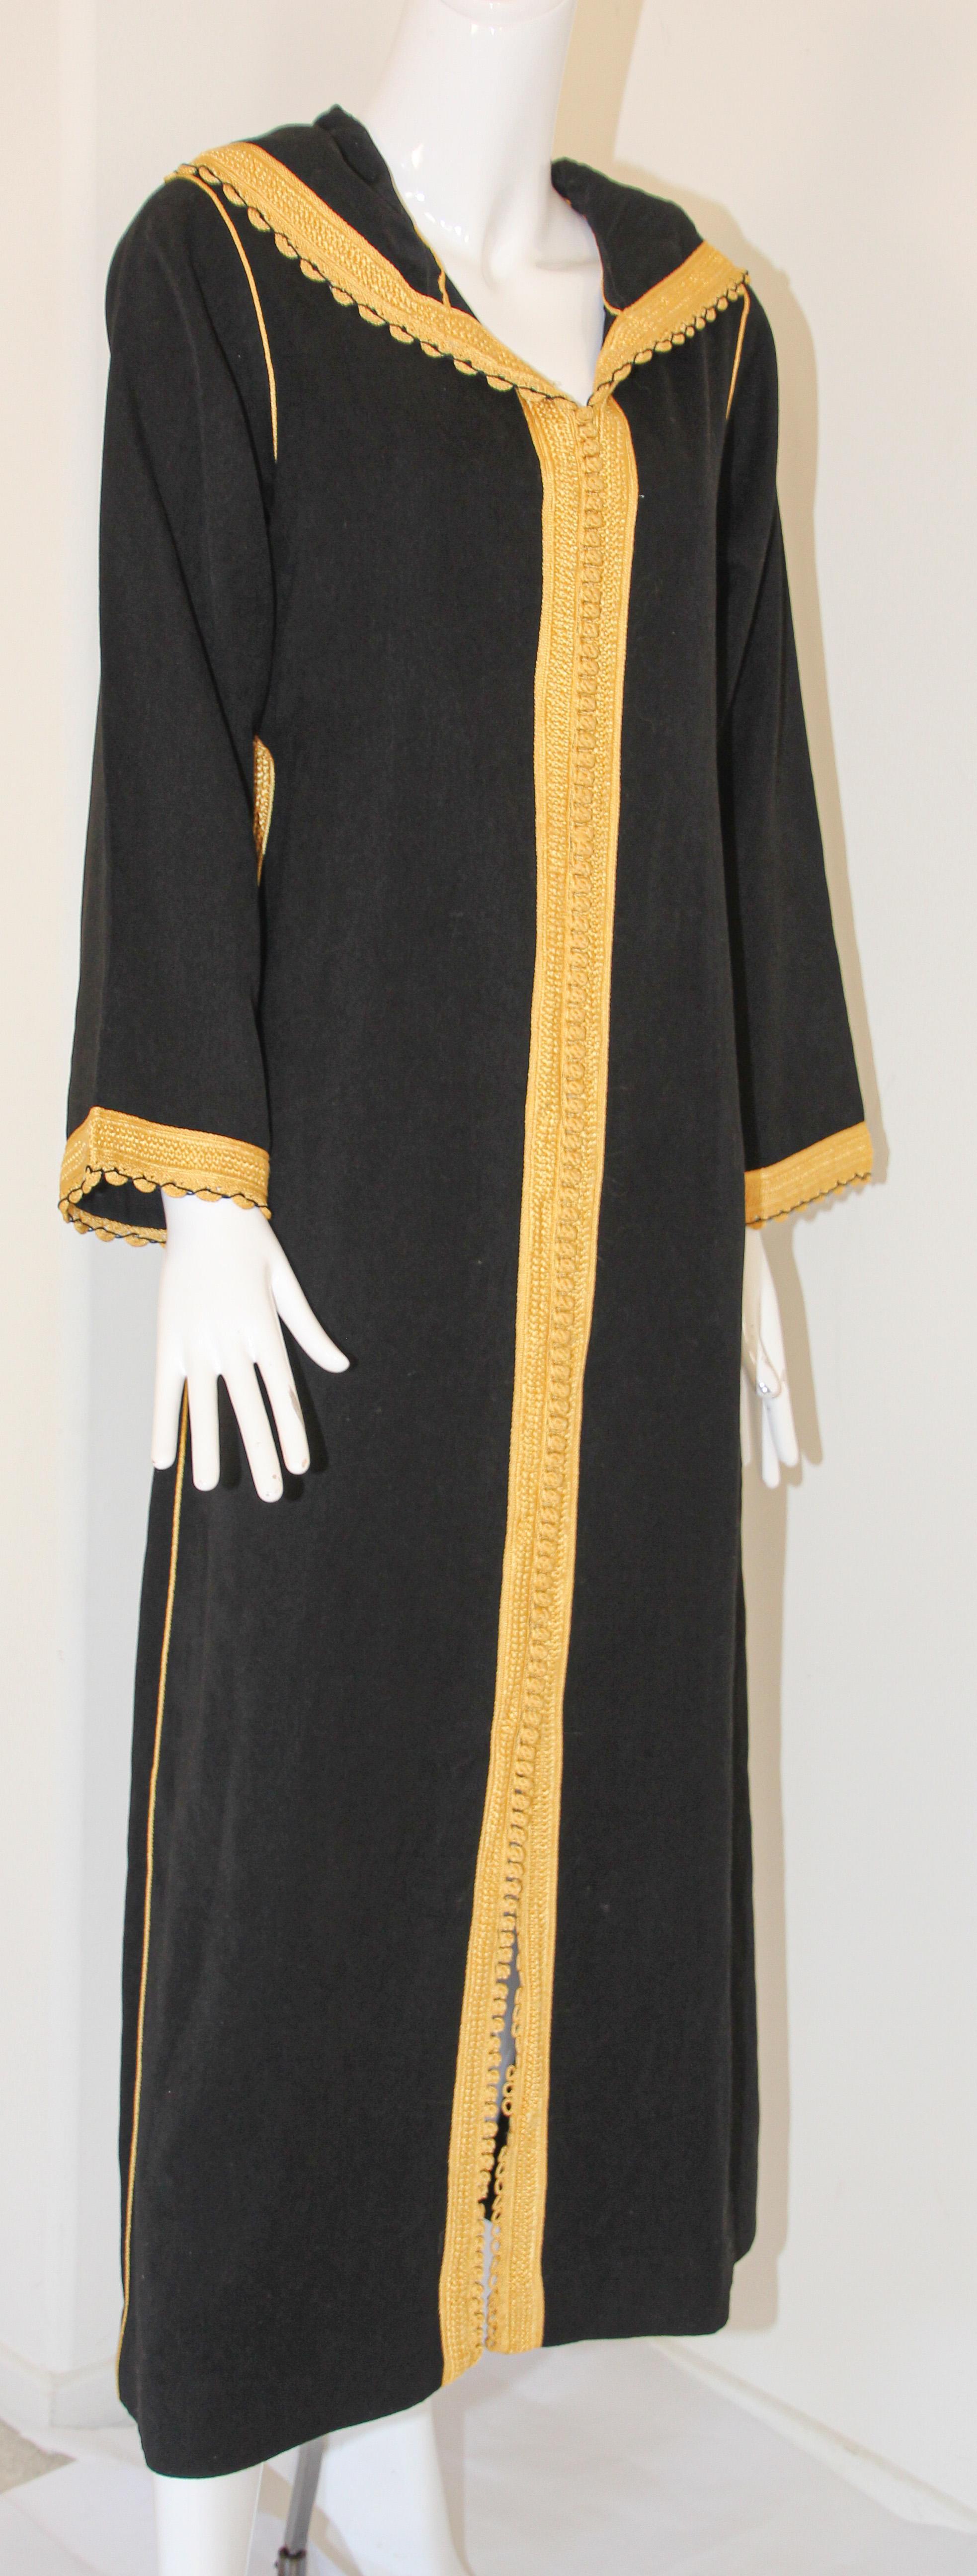 Women's or Men's Vintage Moroccan Caftan, Hooded Black and Gold Trim Kaftan Circa 1970's For Sale